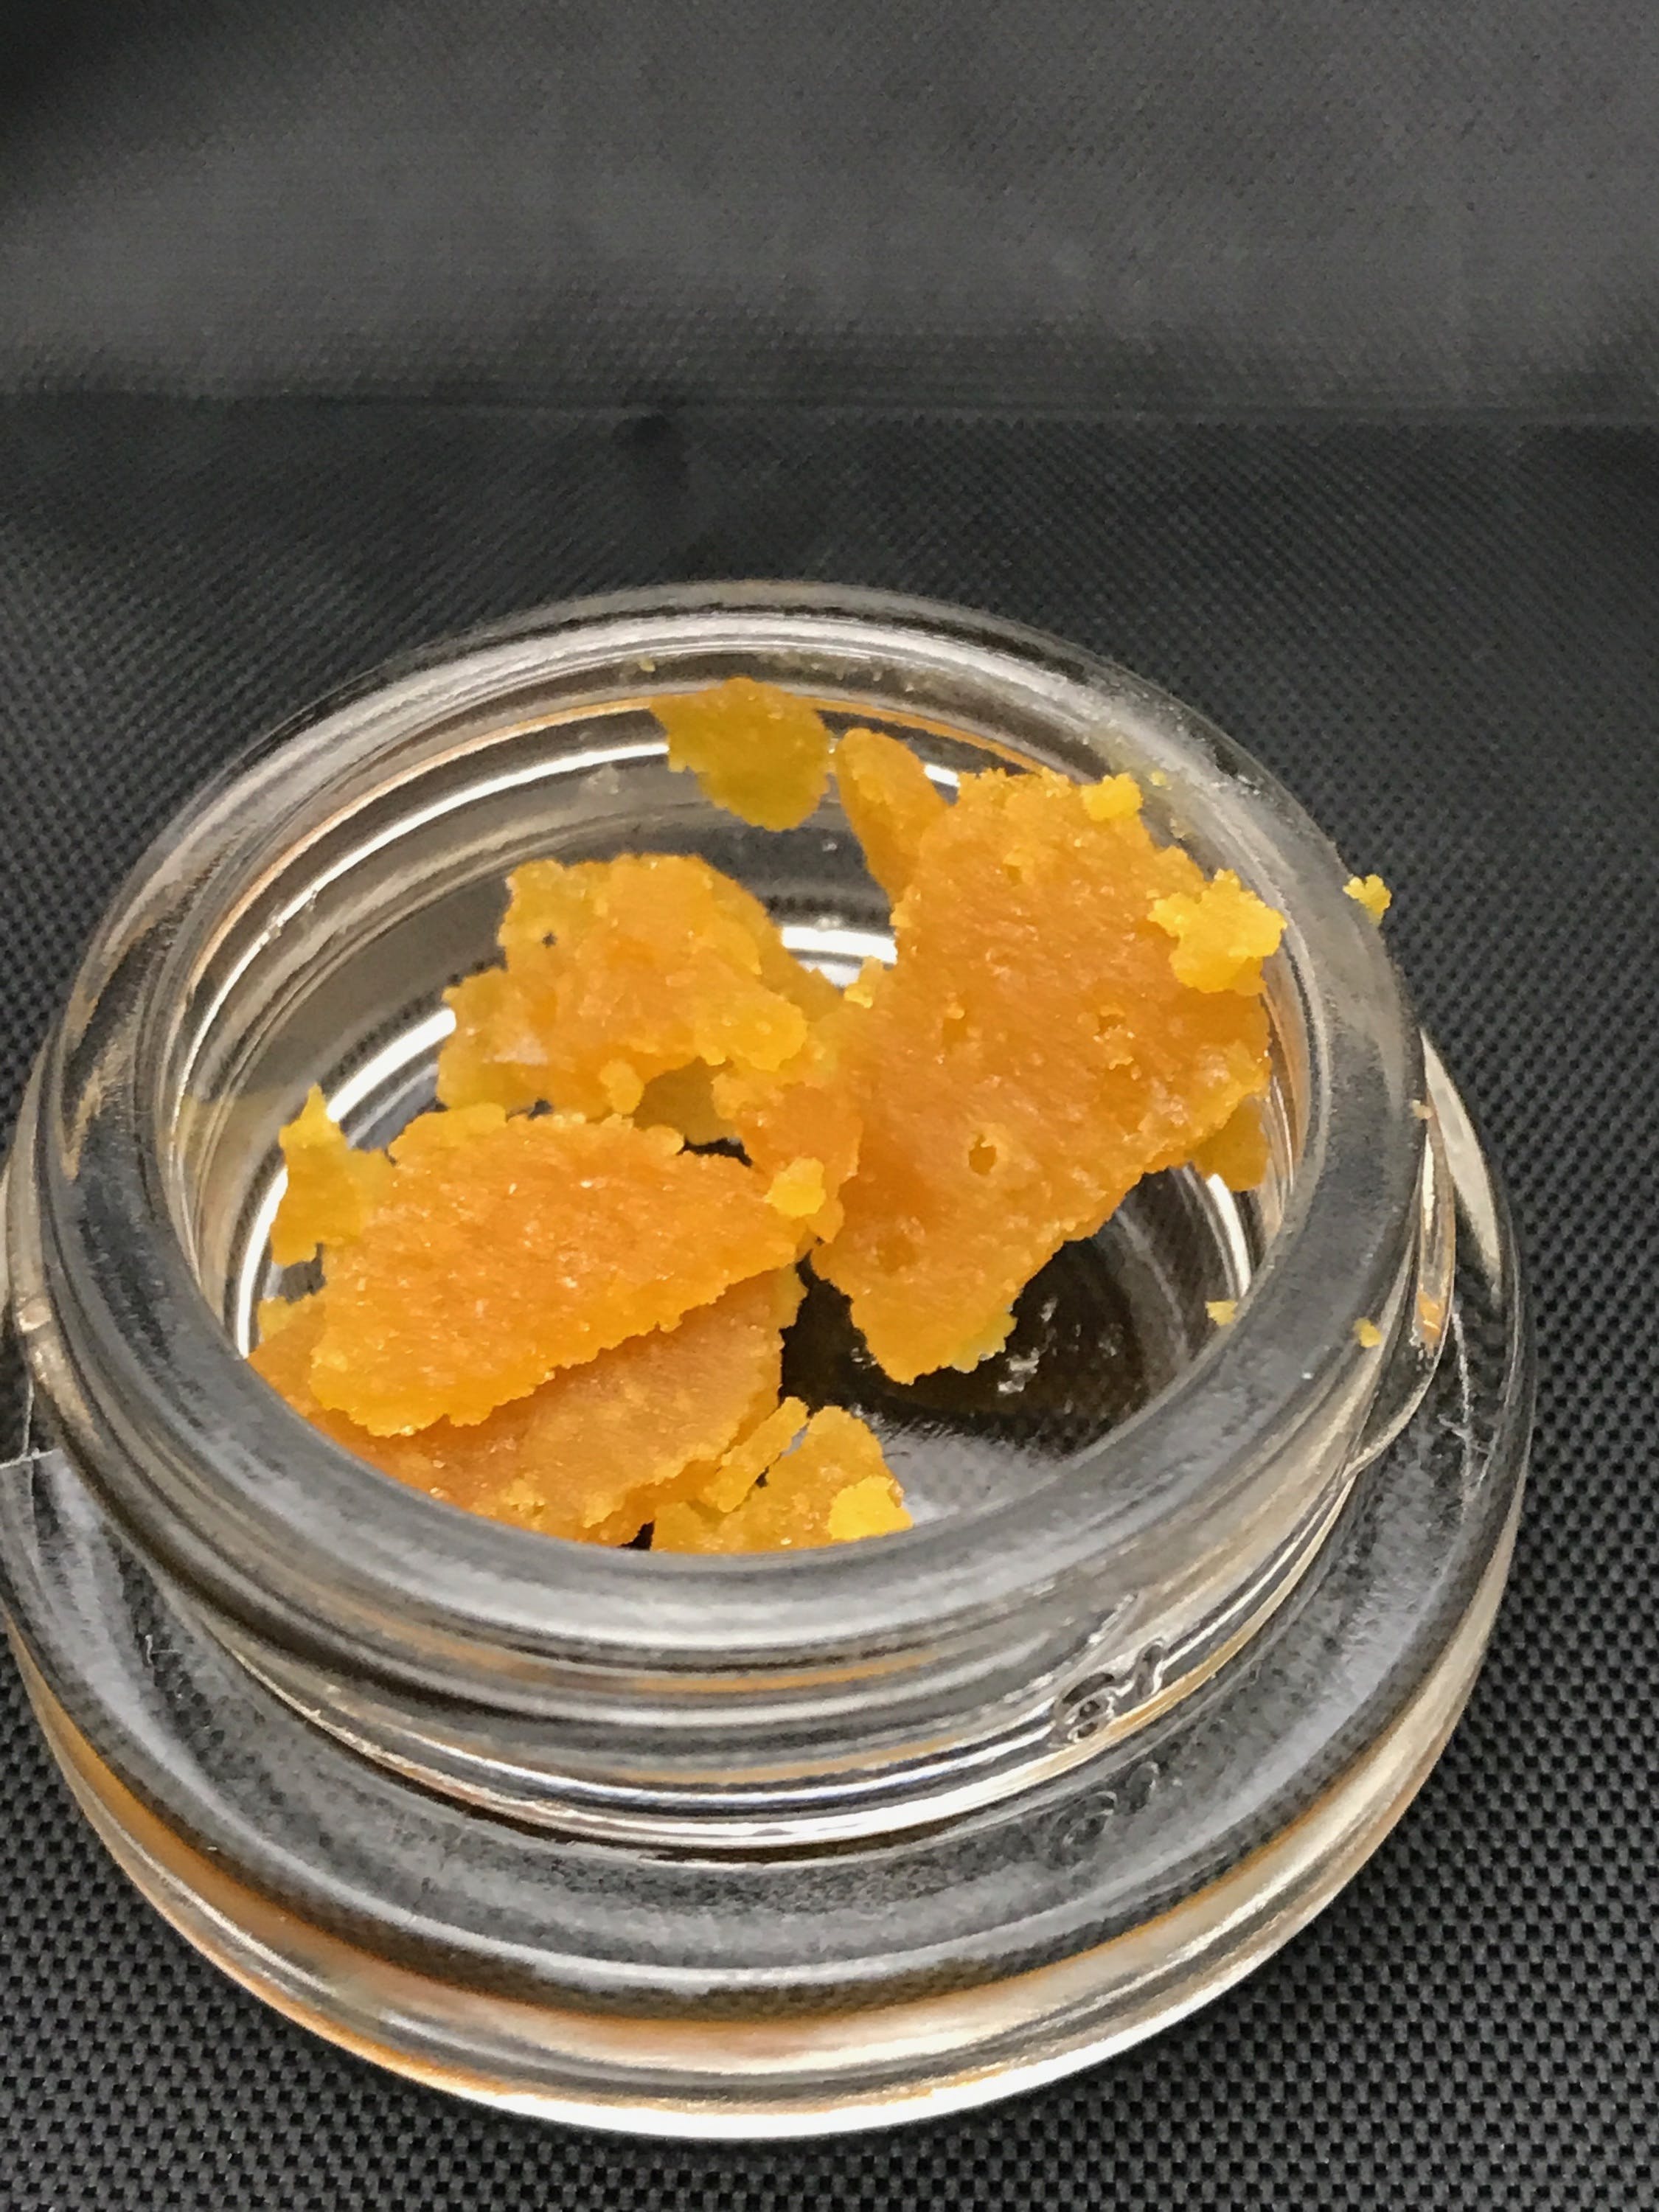 concentrate-infinite-sugar-wax-poison